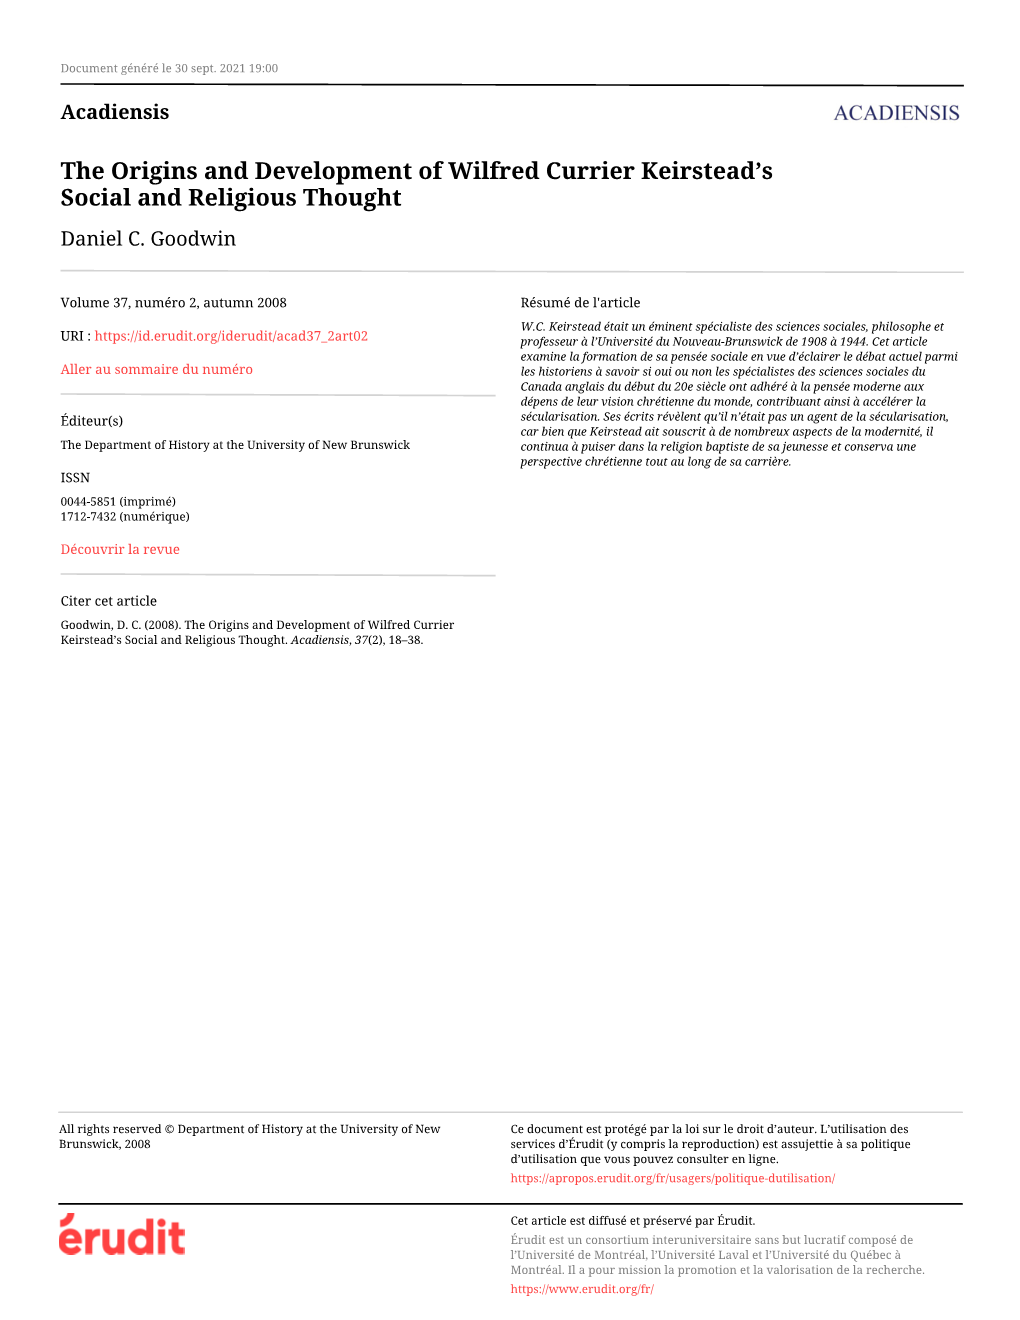 The Origins and Development of Wilfred Currier Keirstead's Social and Religious Thought